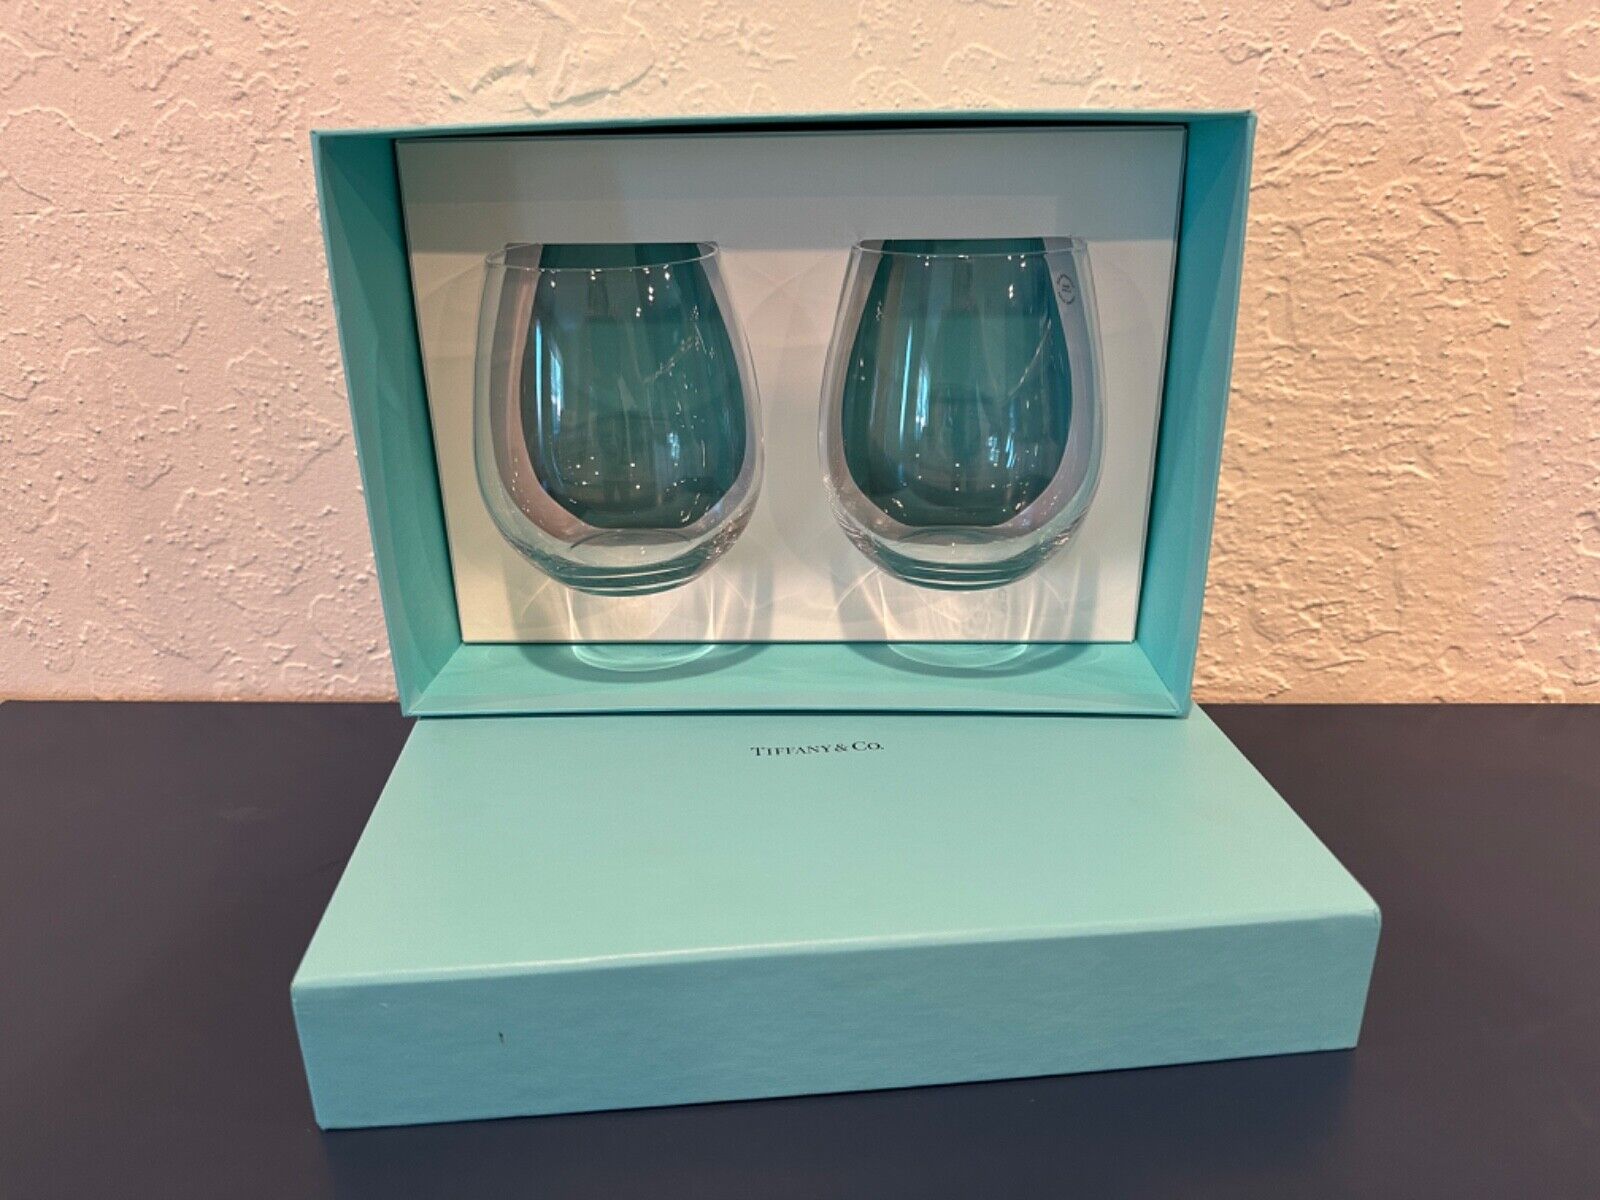 Tiffany & Co Stemless Red Wine Glasses in Crystal Glass, Set of Two - New In Box